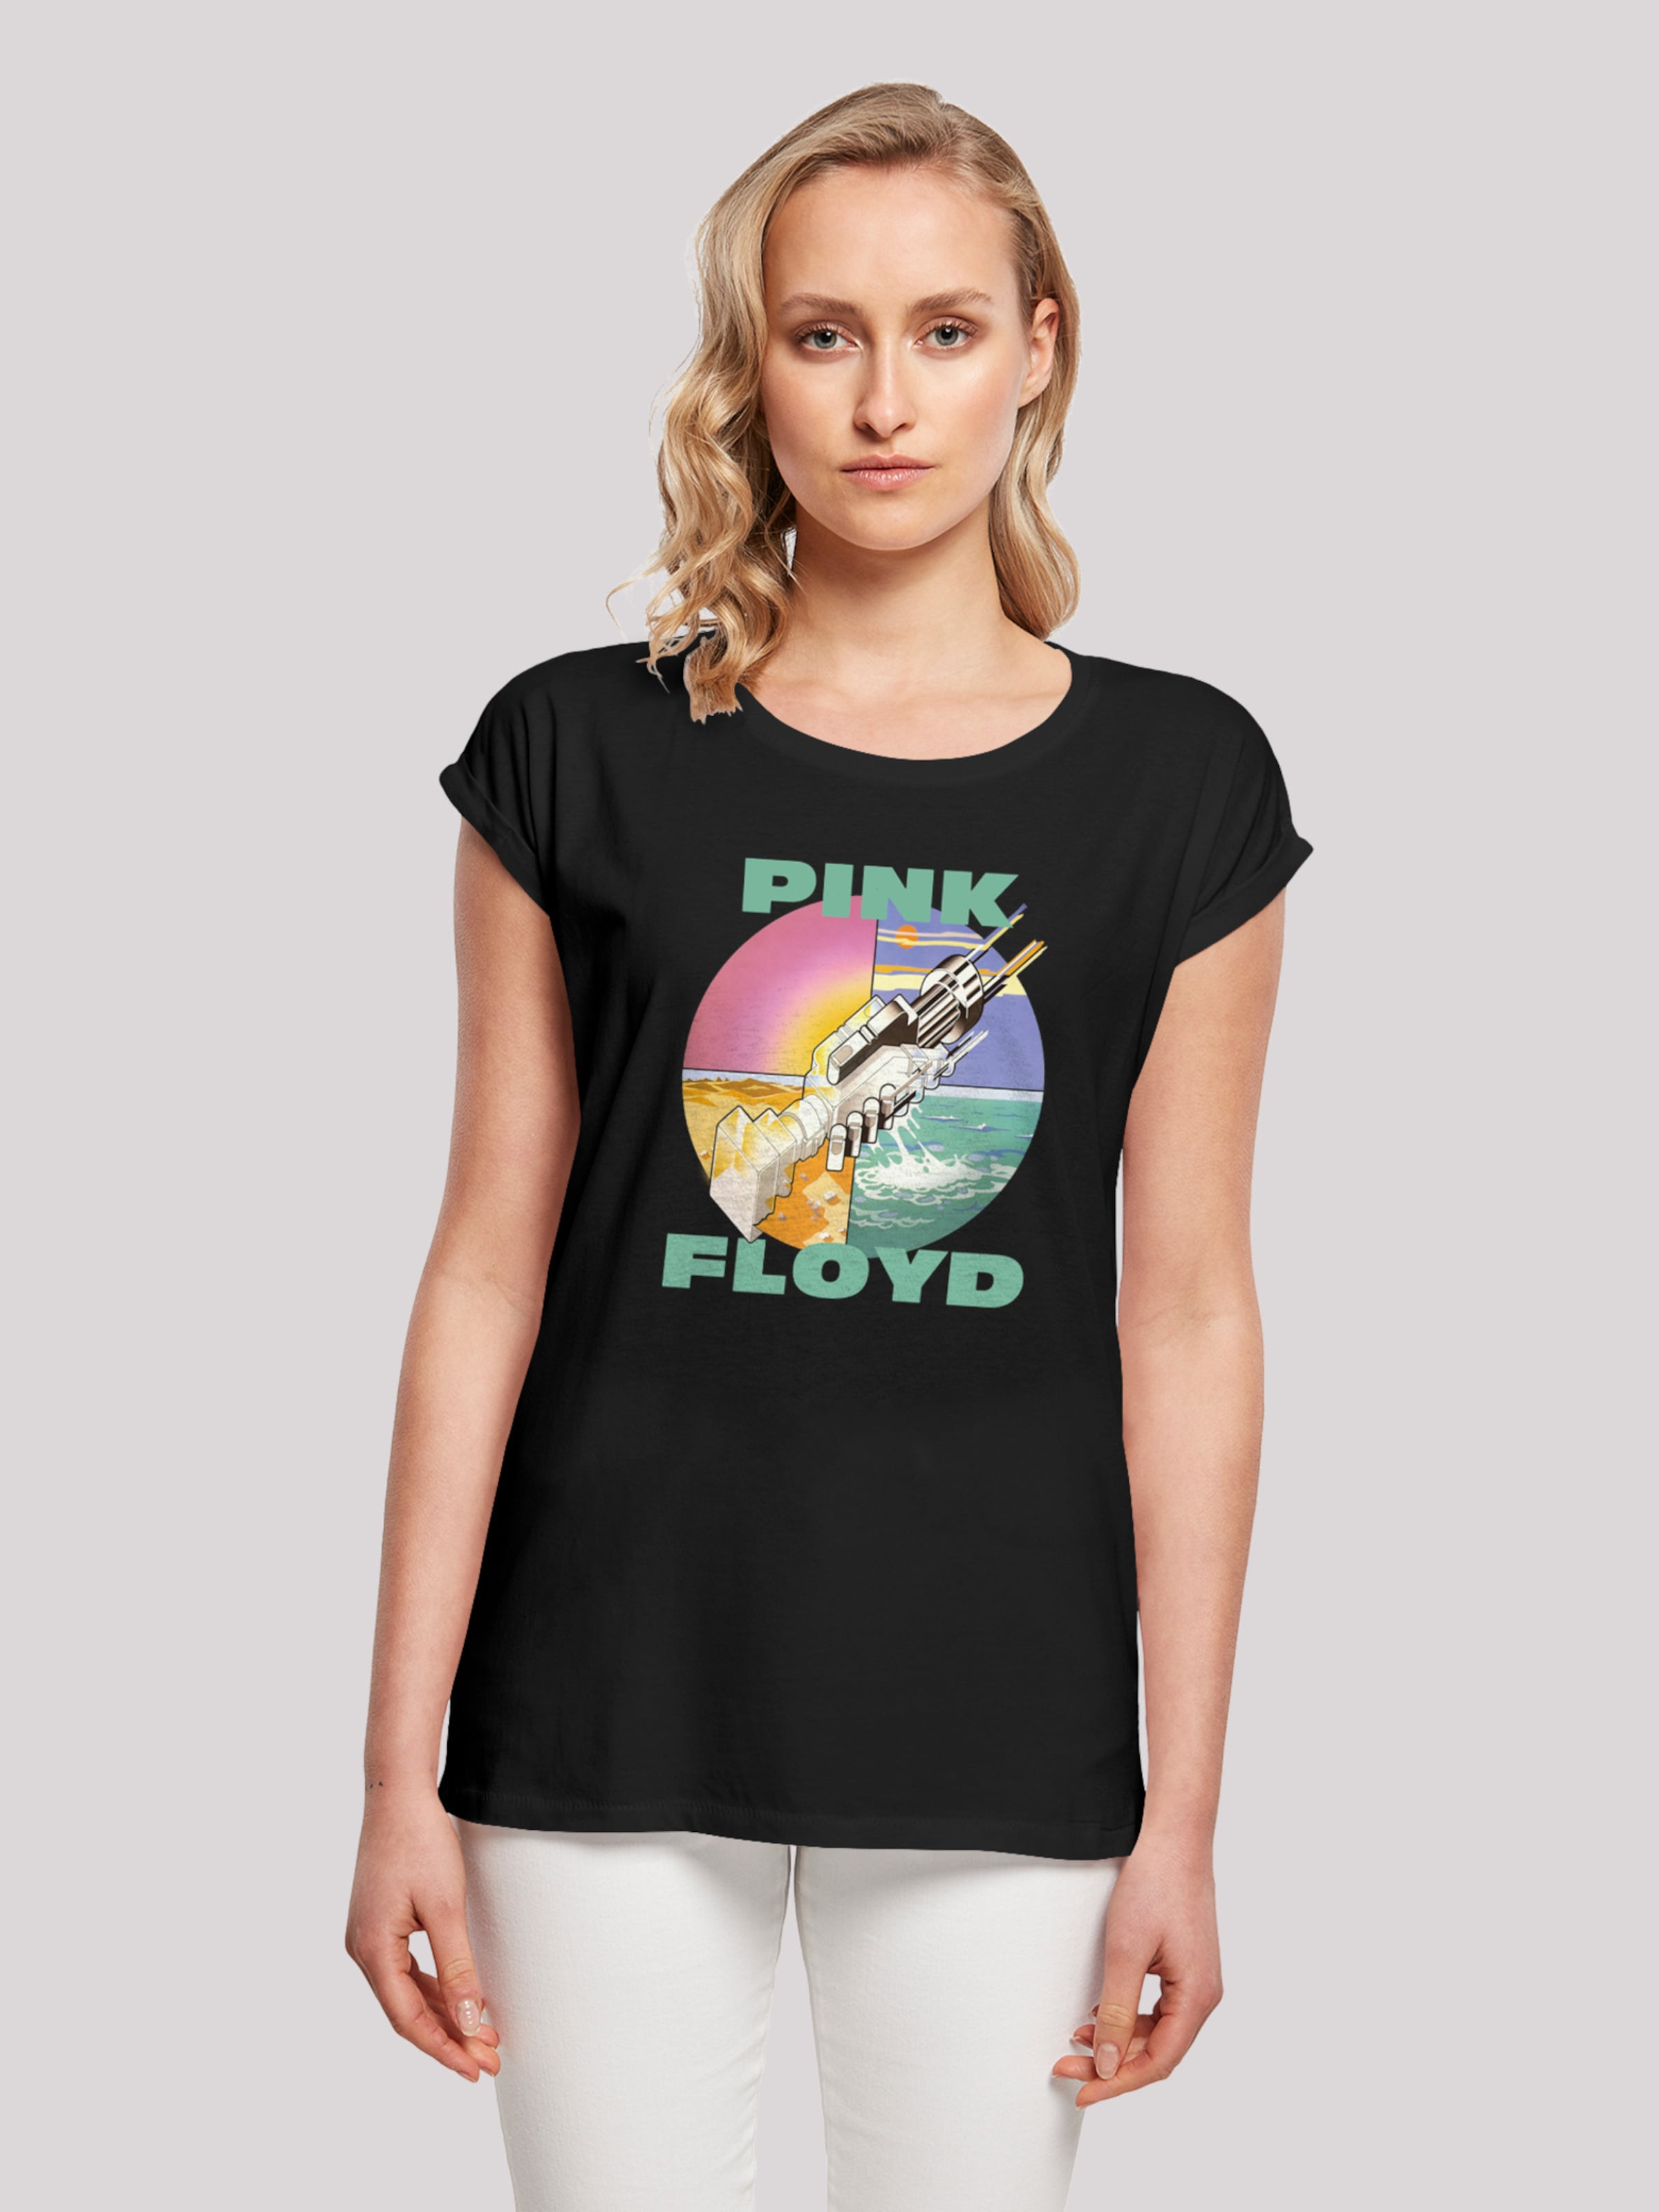 F4NT4STIC Shirt Here\' in Schwarz | ABOUT \'Pink Wish YOU You Floyd Were